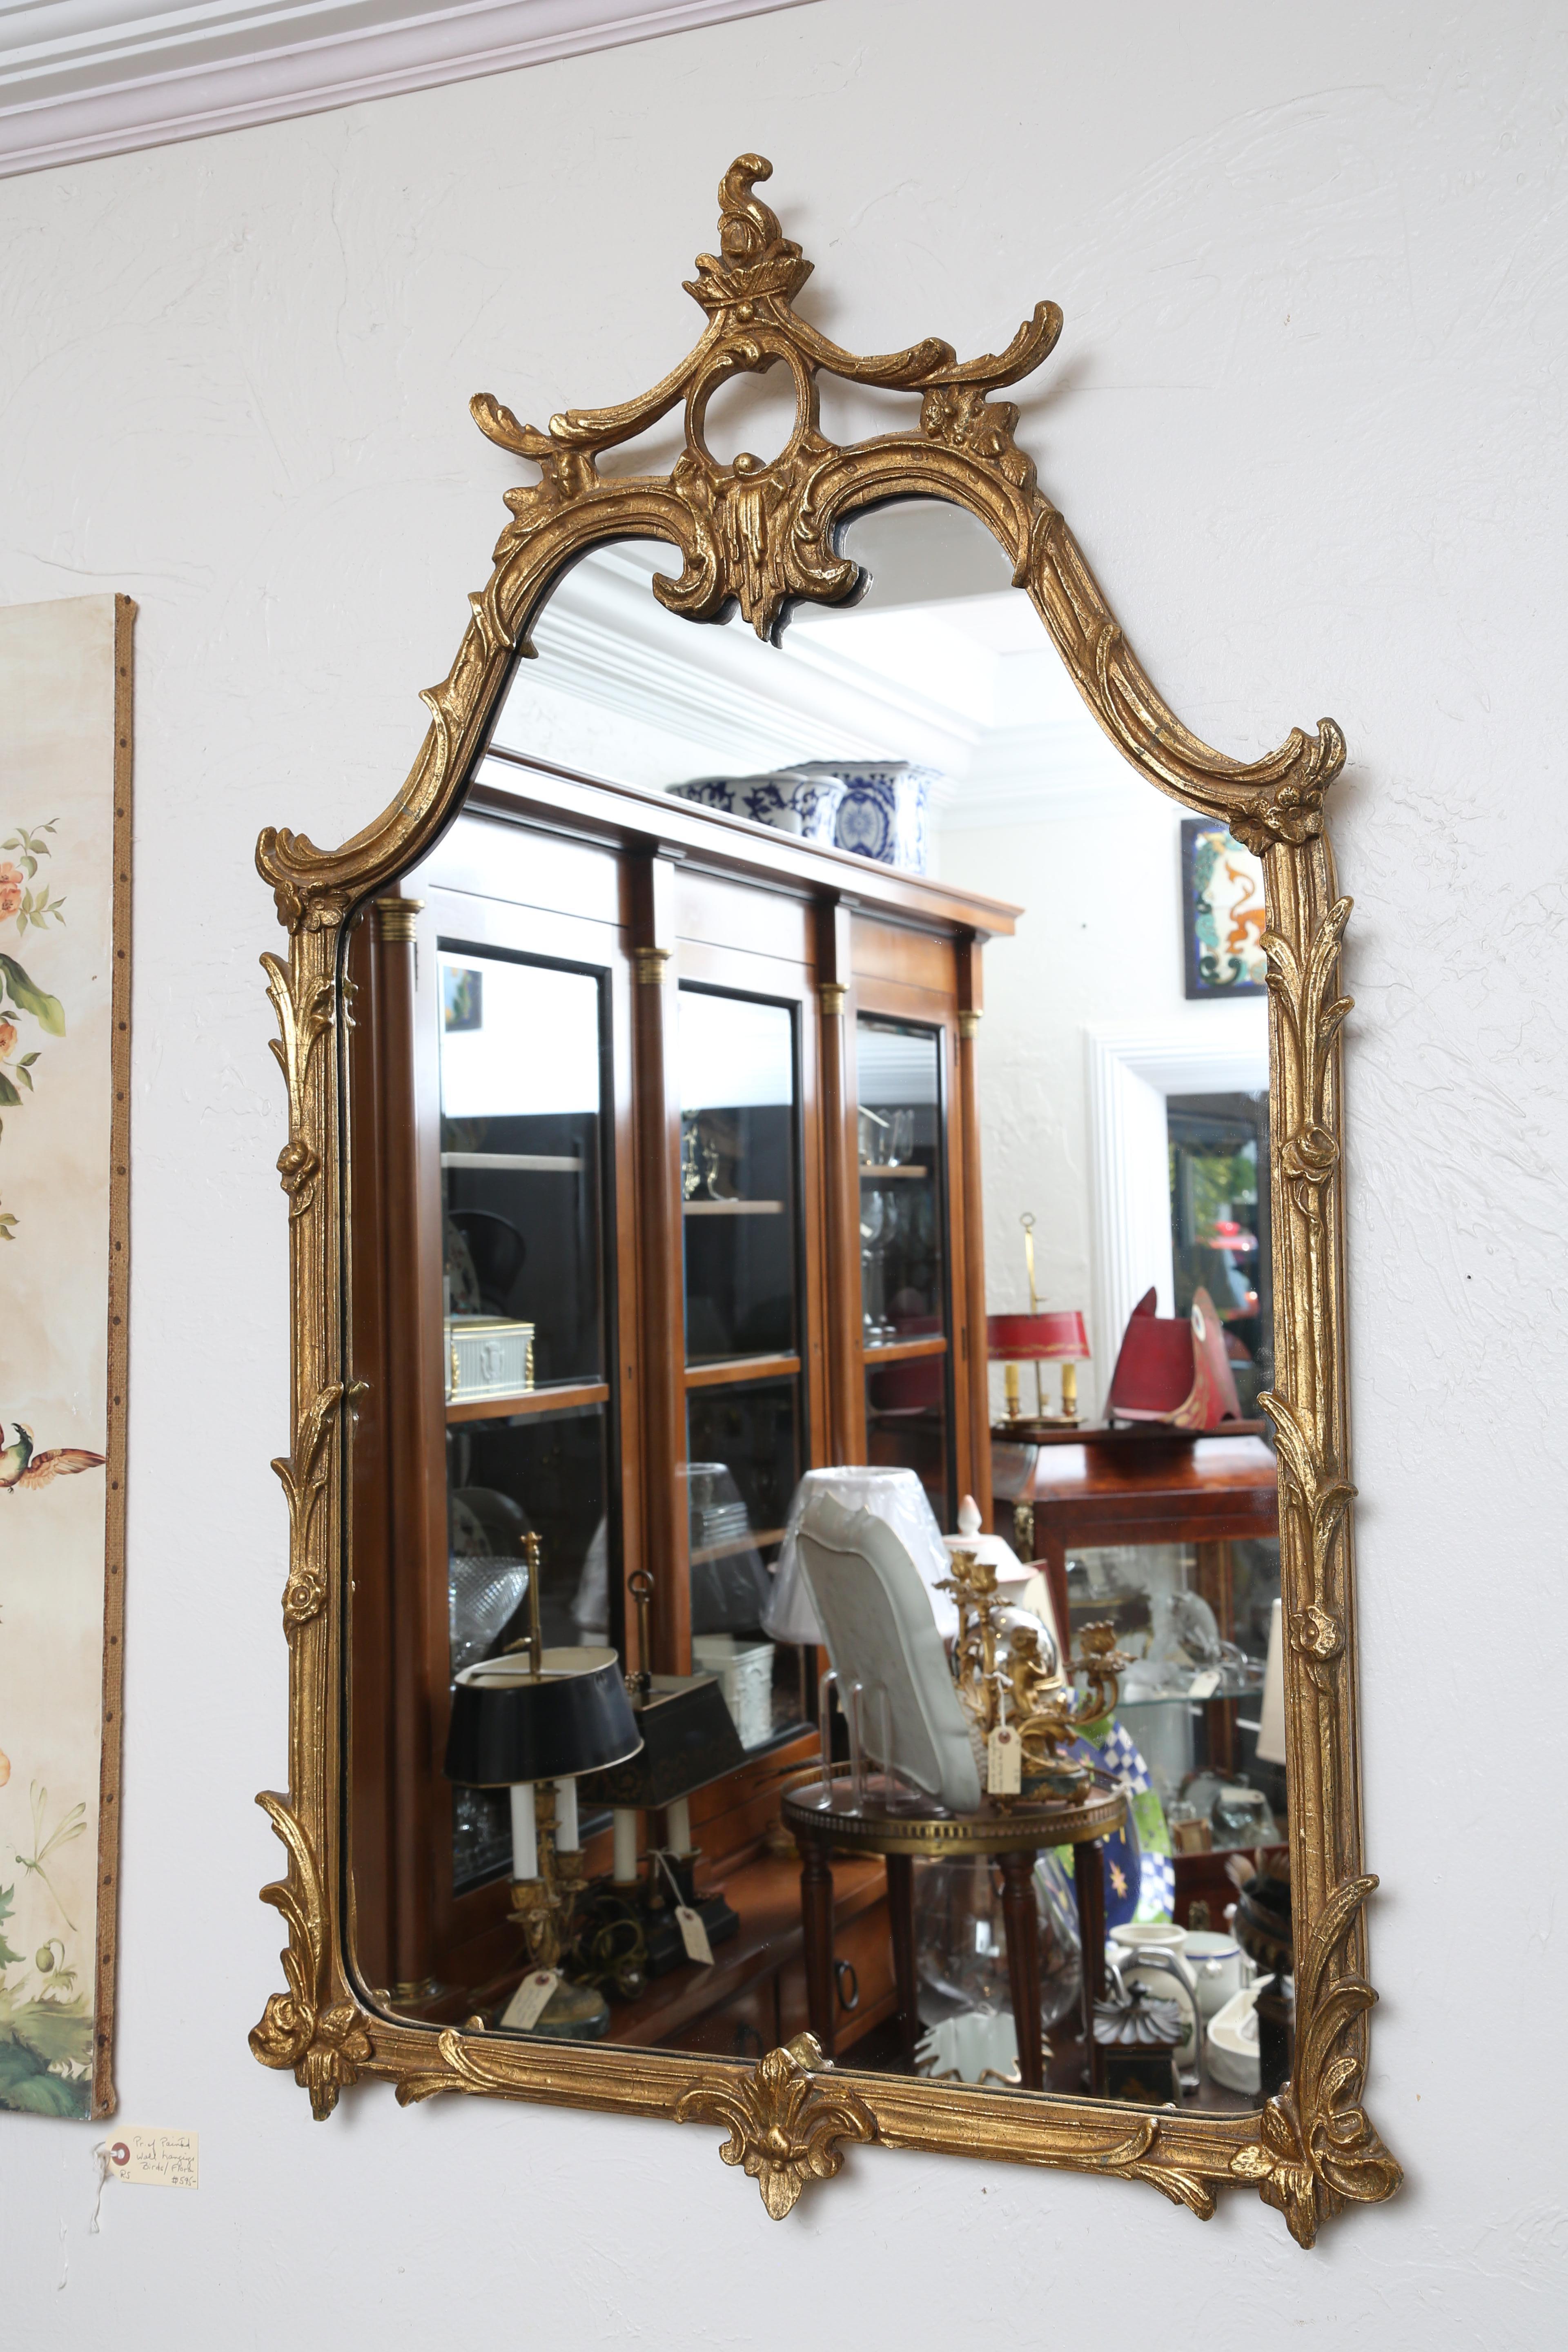 Midcentury wood carved and gilded mirror in a pagoda type form by the Friedman Brothers.